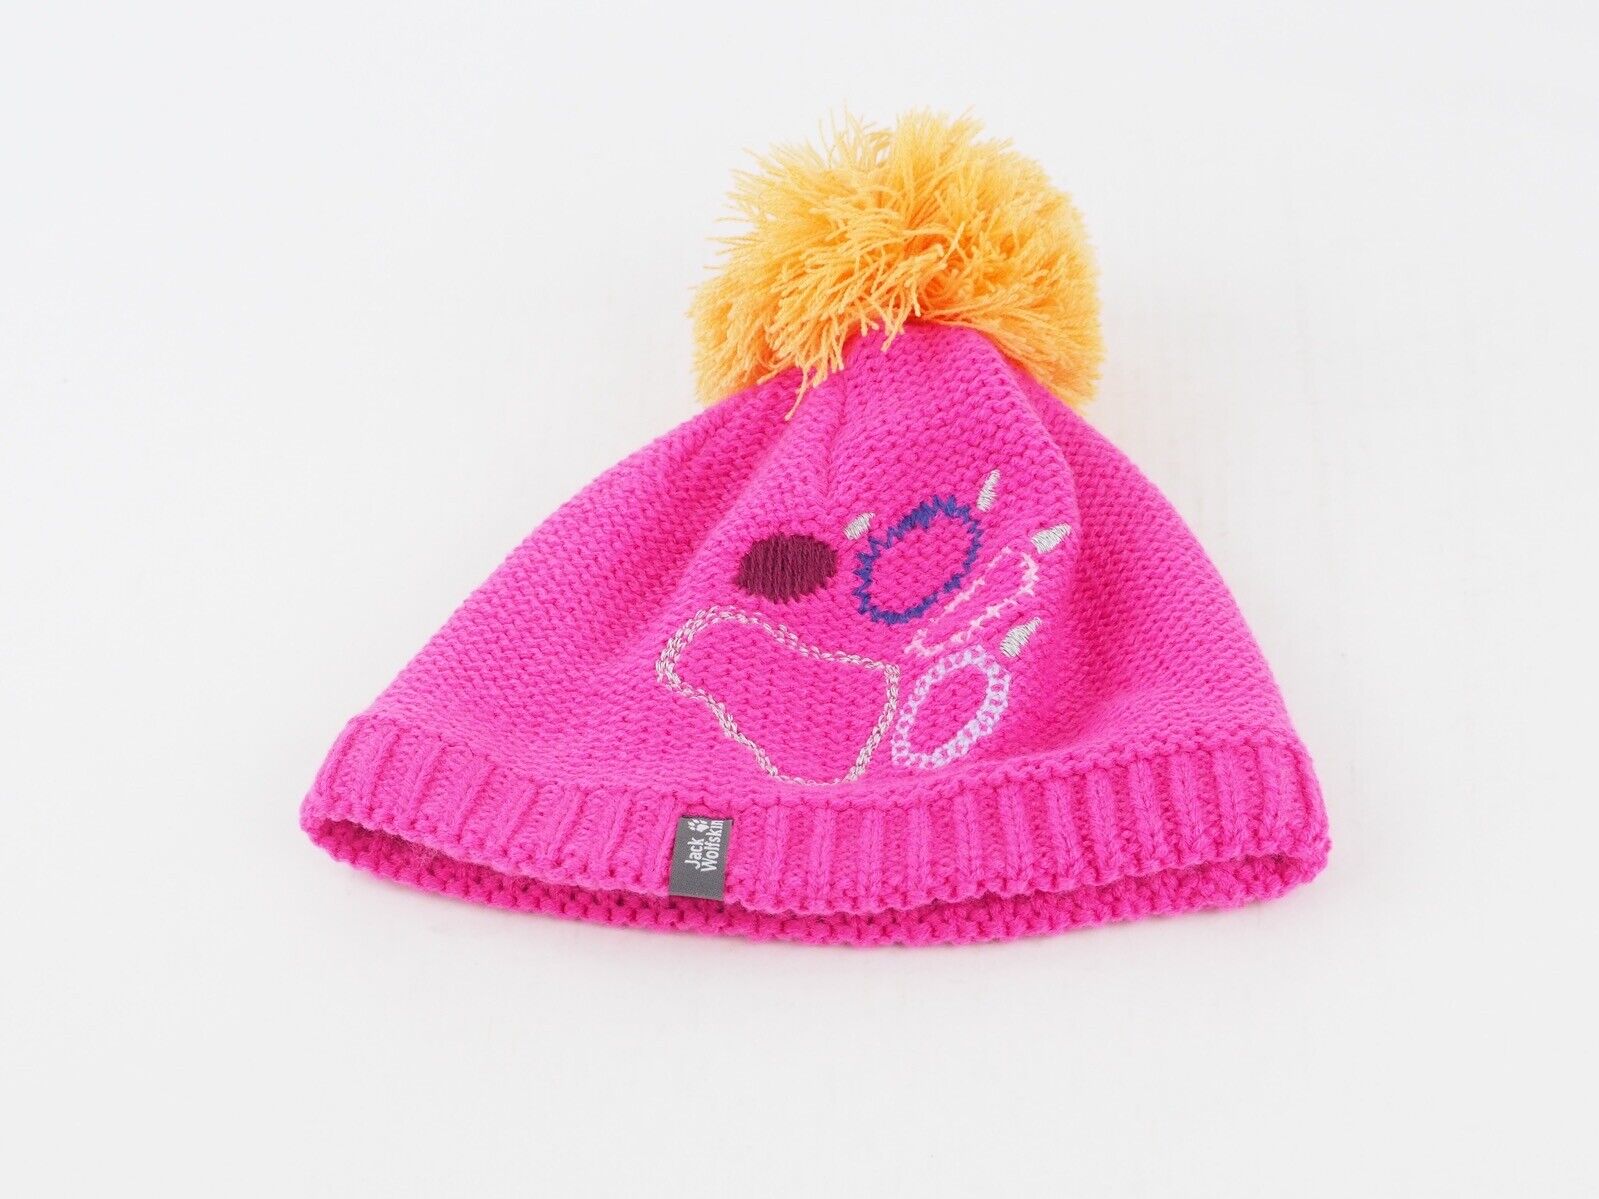 Paw Pom A – London Cap Top Print Winter Girls Hat Jack Pink Warm Knit With Wolfskin Style